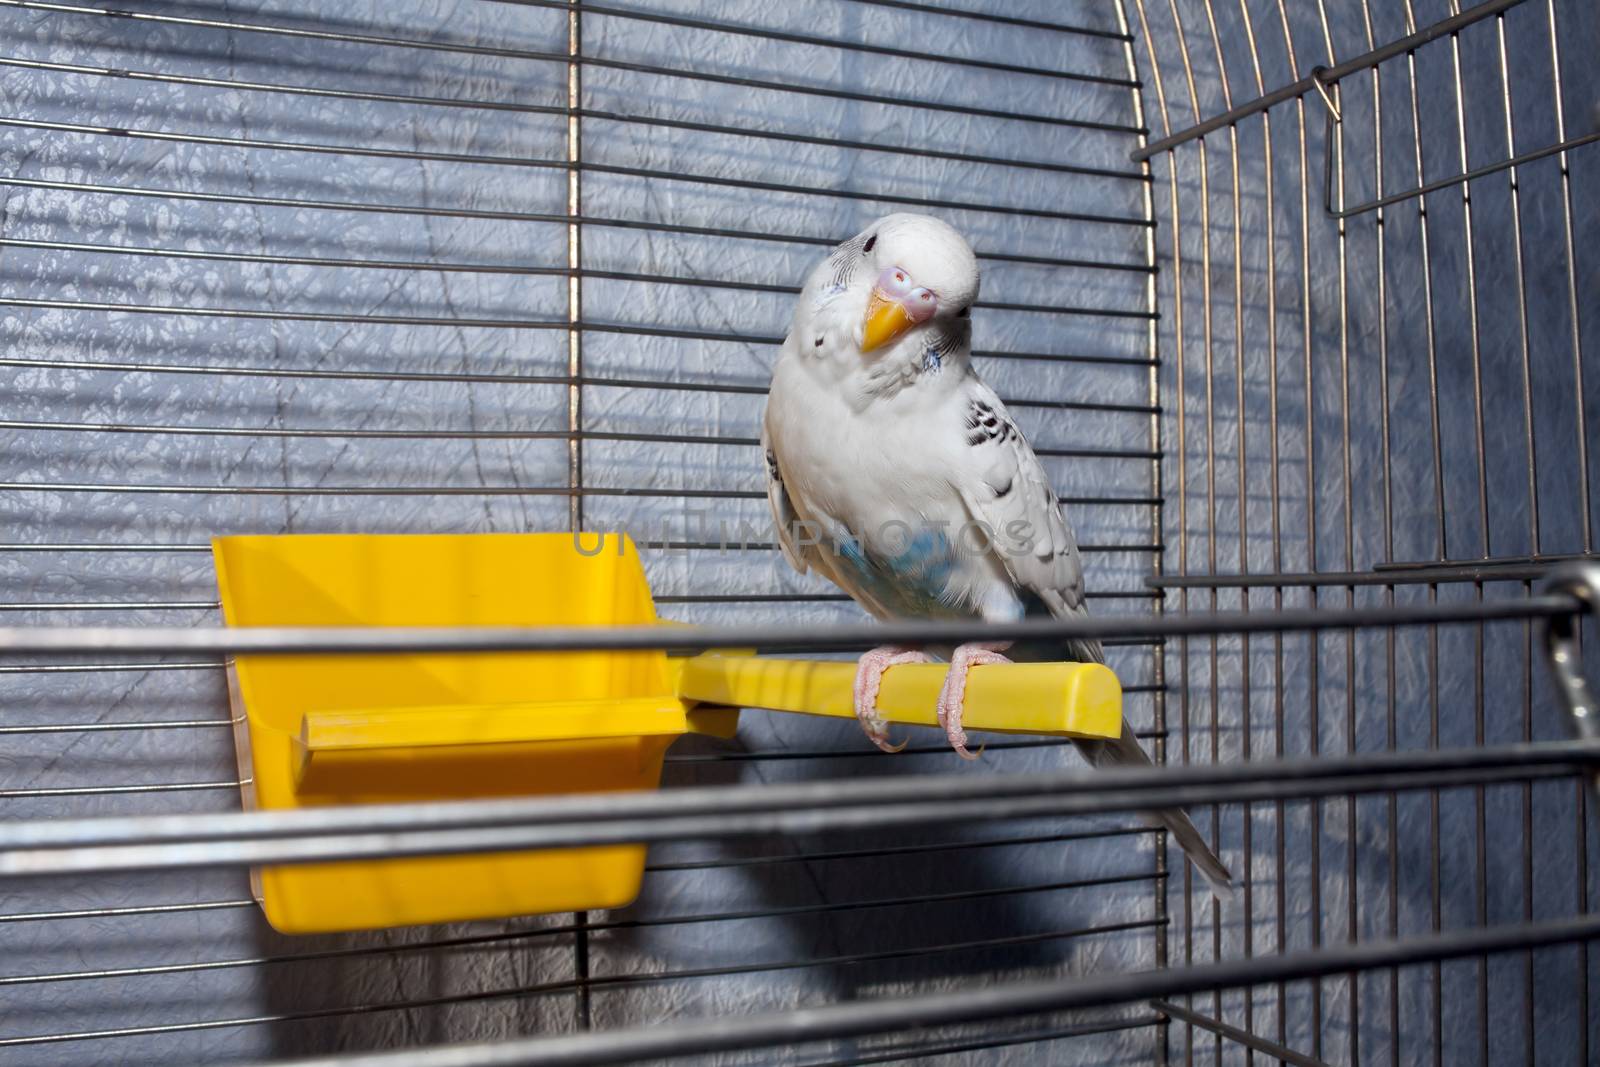 Young budgies male with blue and white plumage sitting on a perch open metal cage